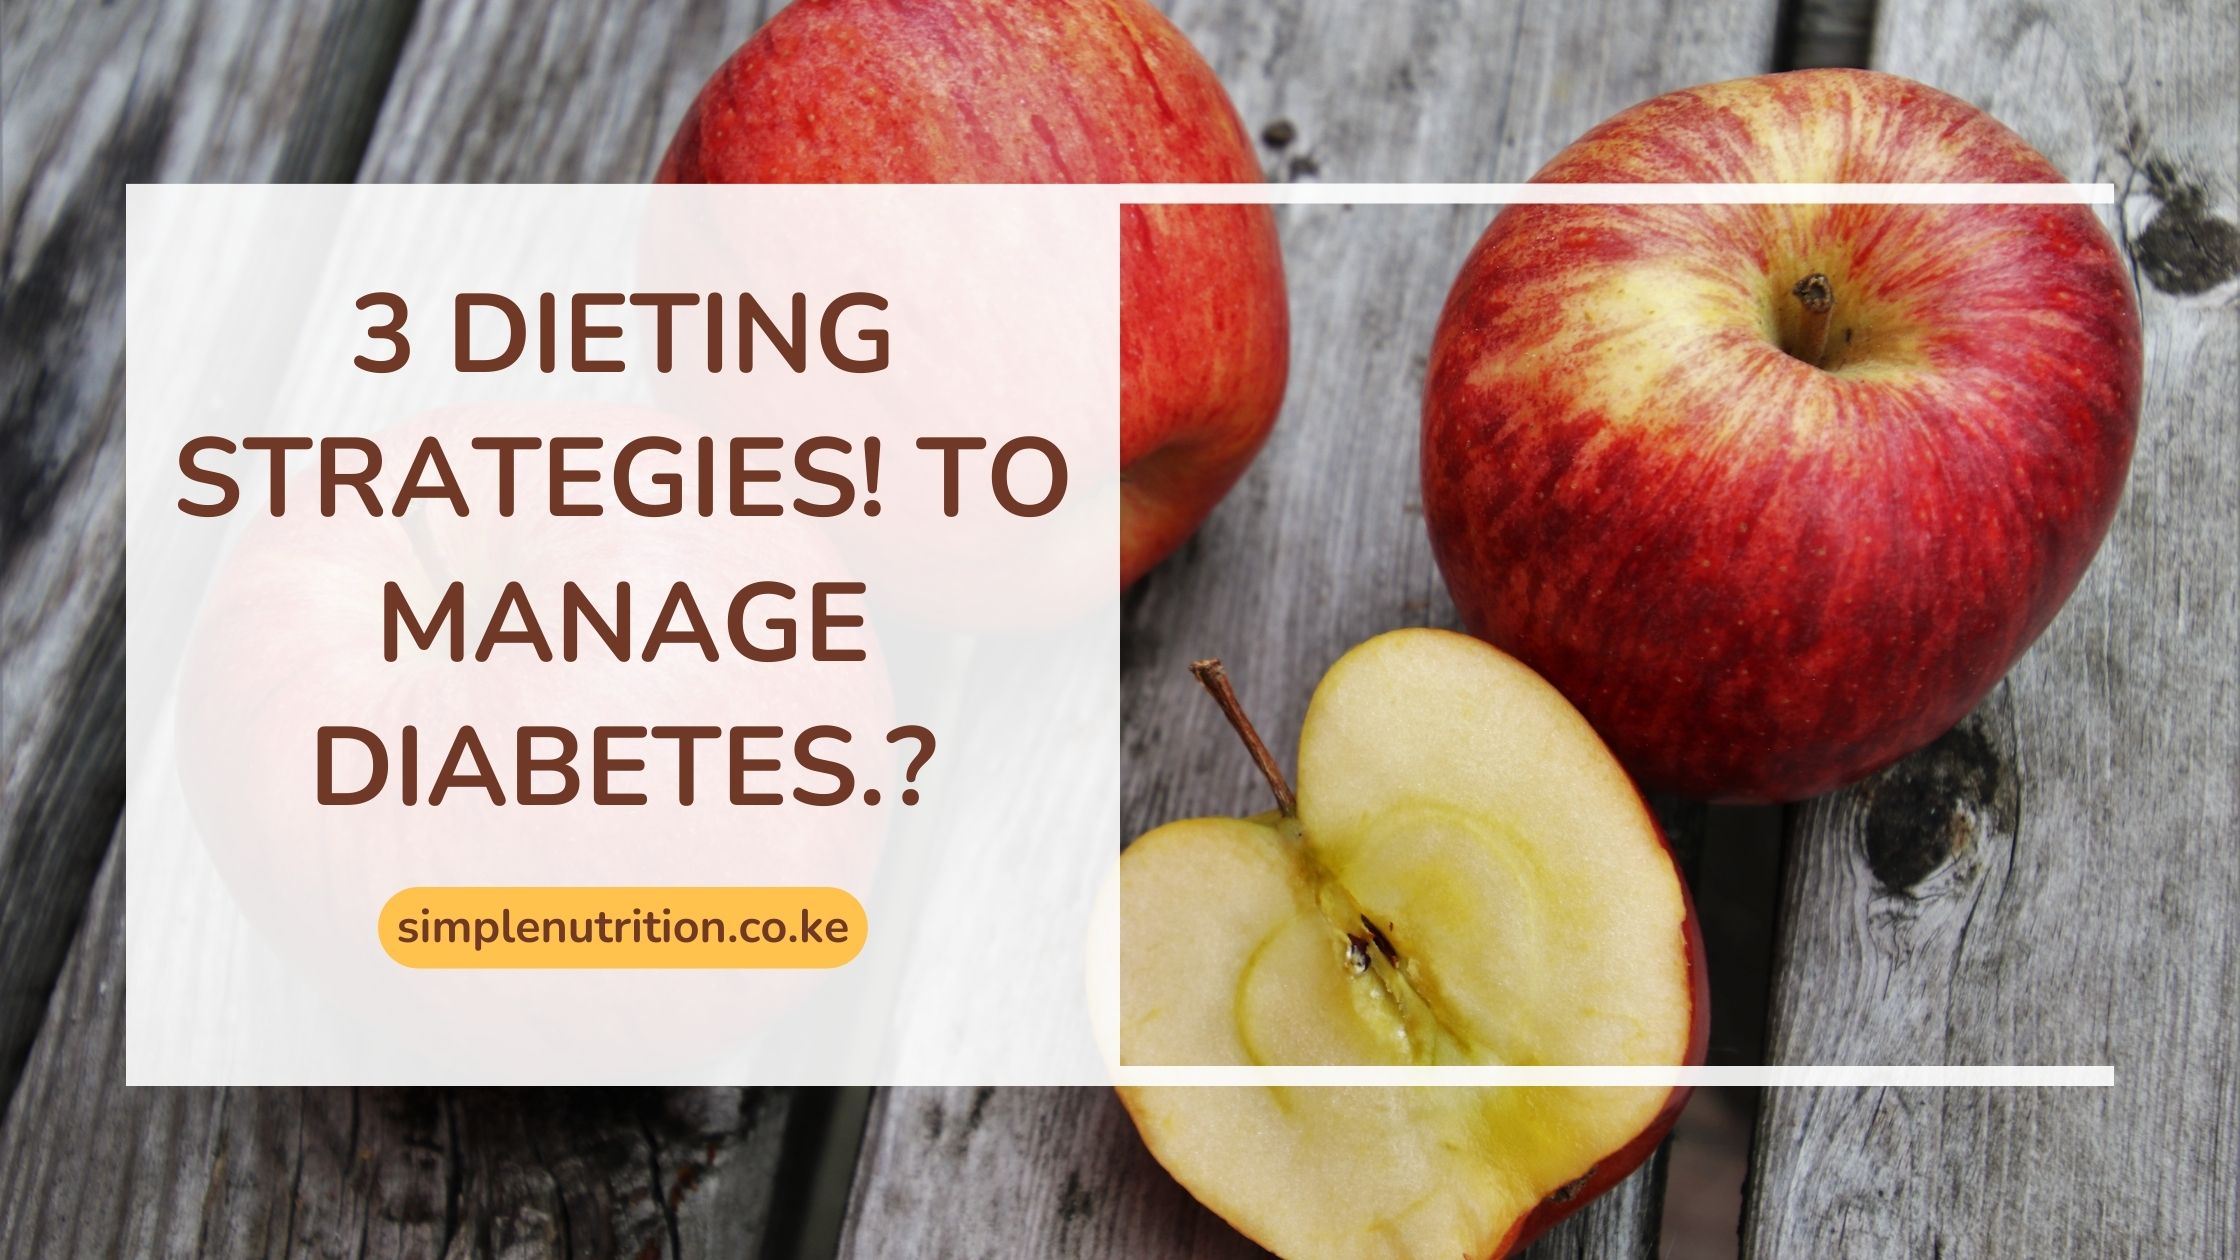 3 Dieting Strategies! How To Manage Diabetes.